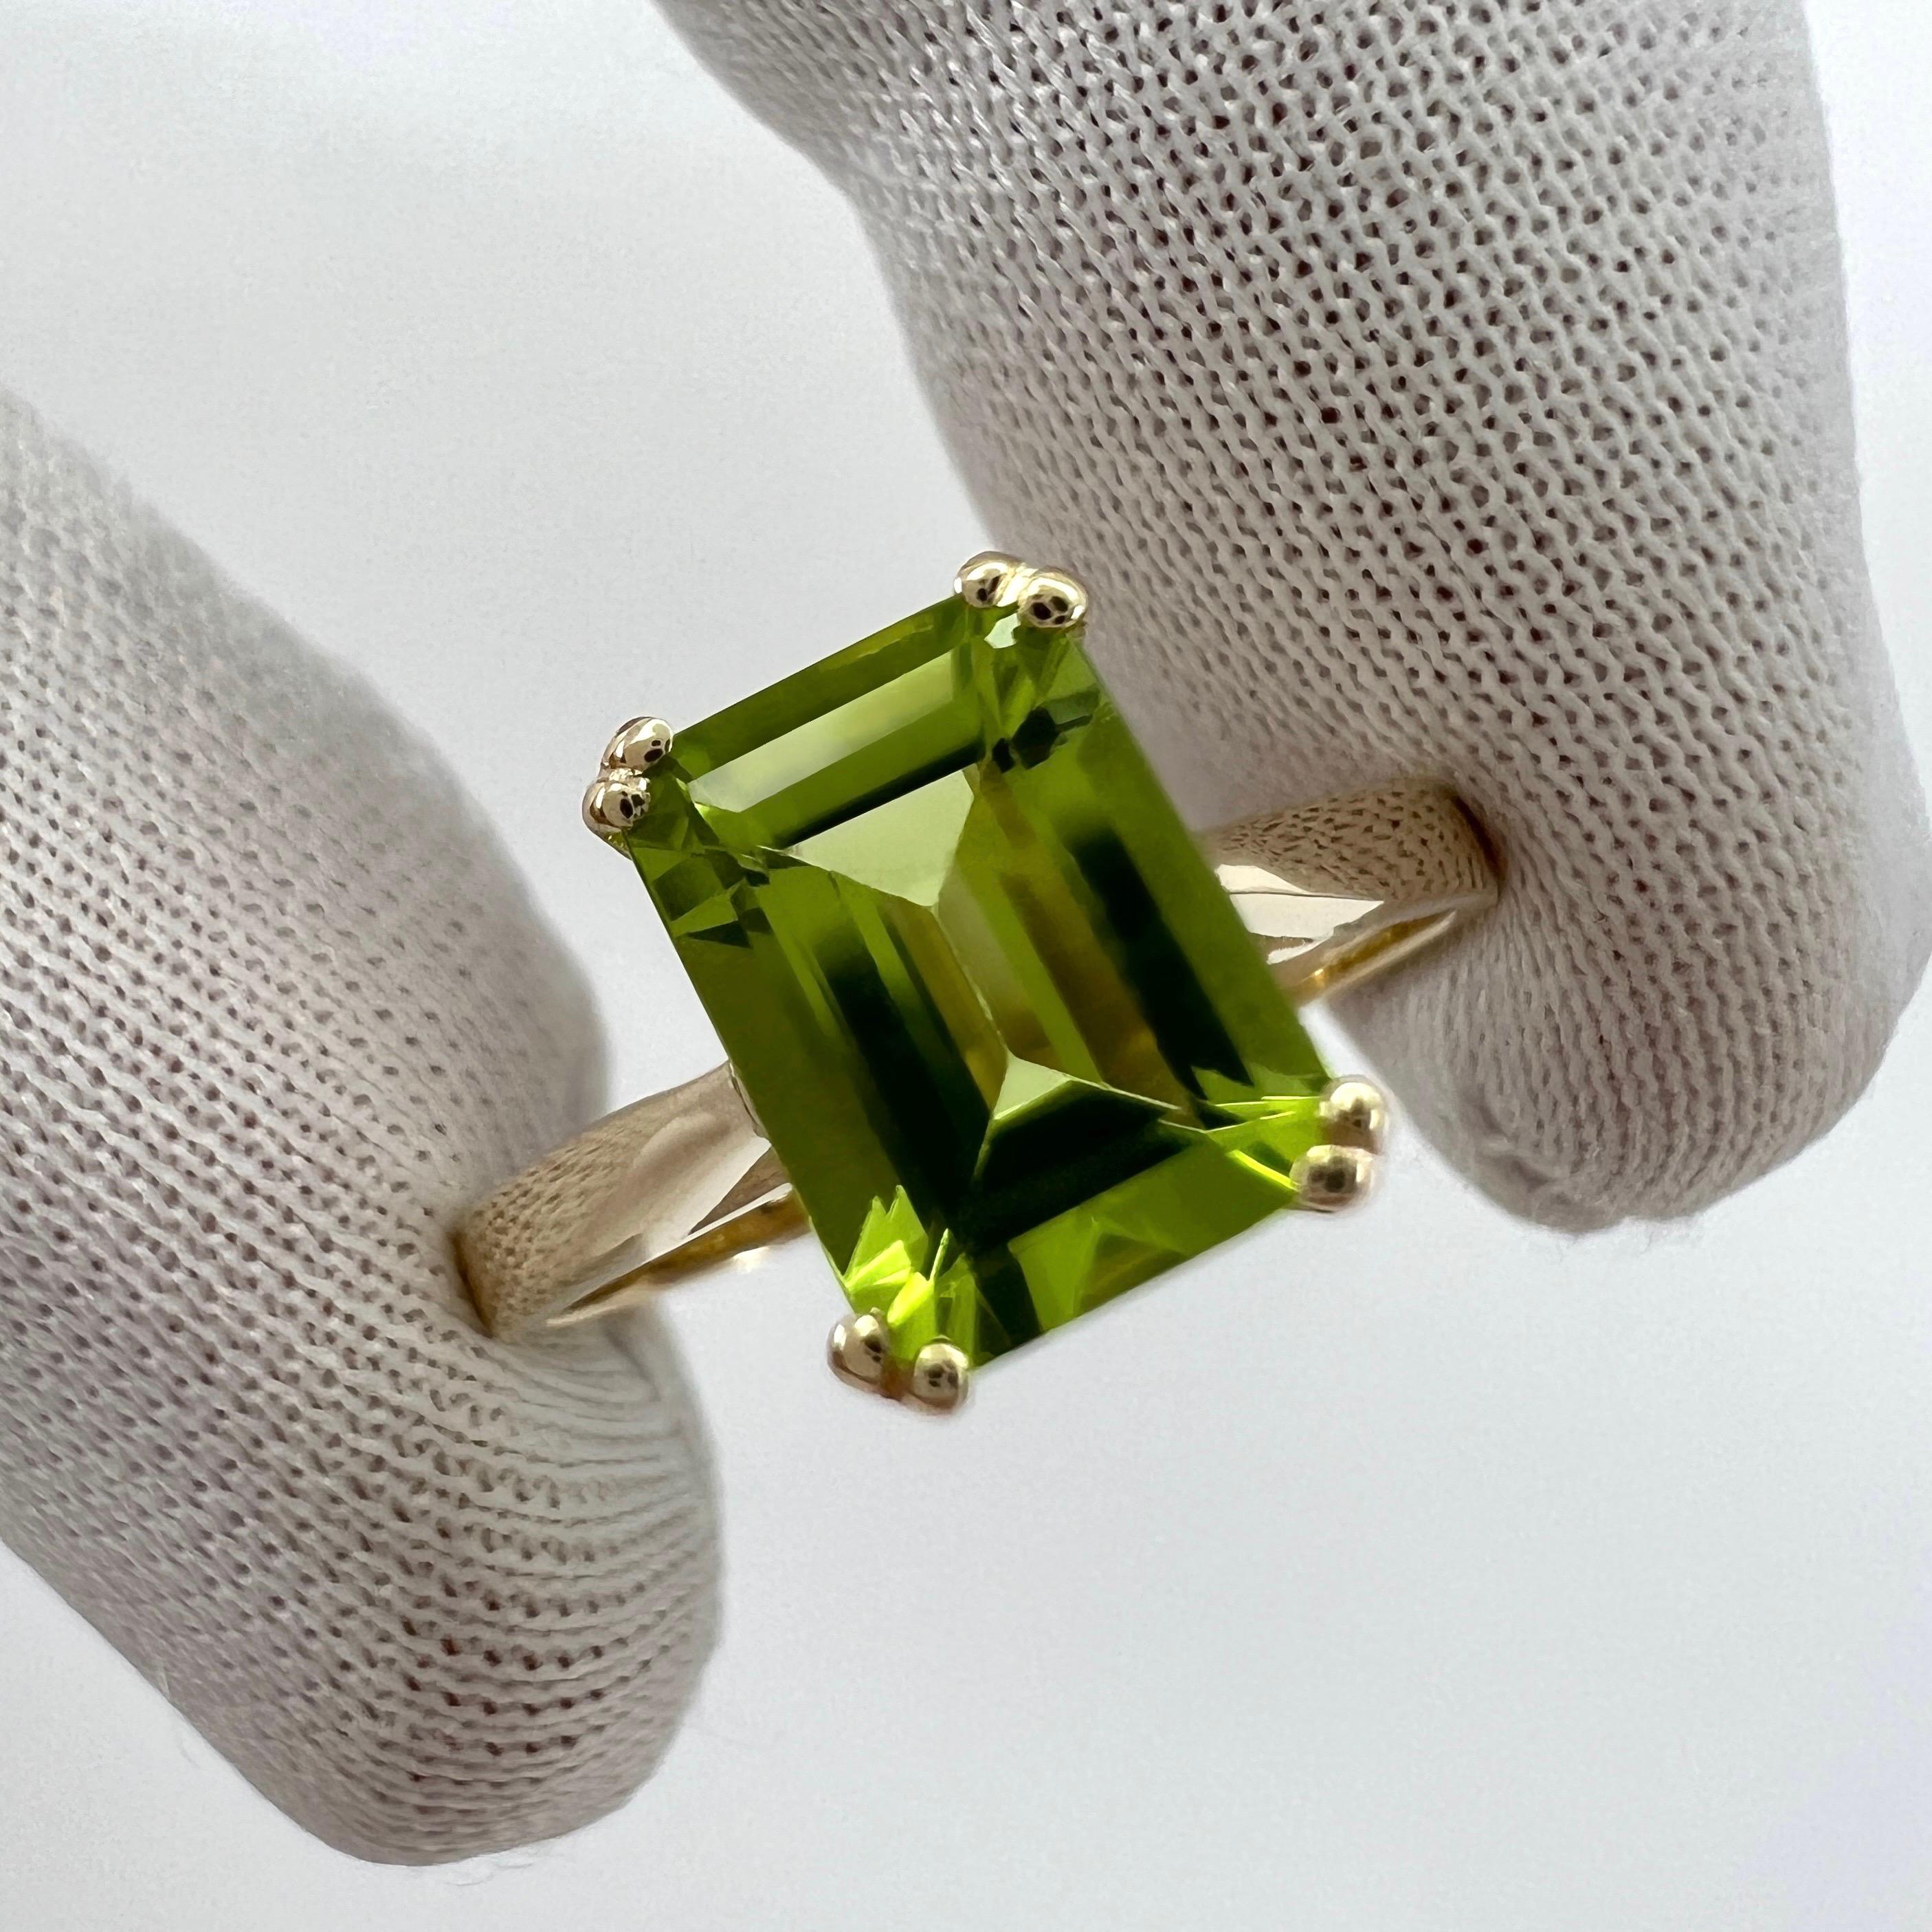 Natural Emerald Octagonal Cut Vivid Green Peridot Solitaire Ring.

1.50 Carat peridot with a stunning vivid green colour and excellent clarity, very clean stone. 
Also has an excellent emerald octagonal cut which shows the fine colour to best